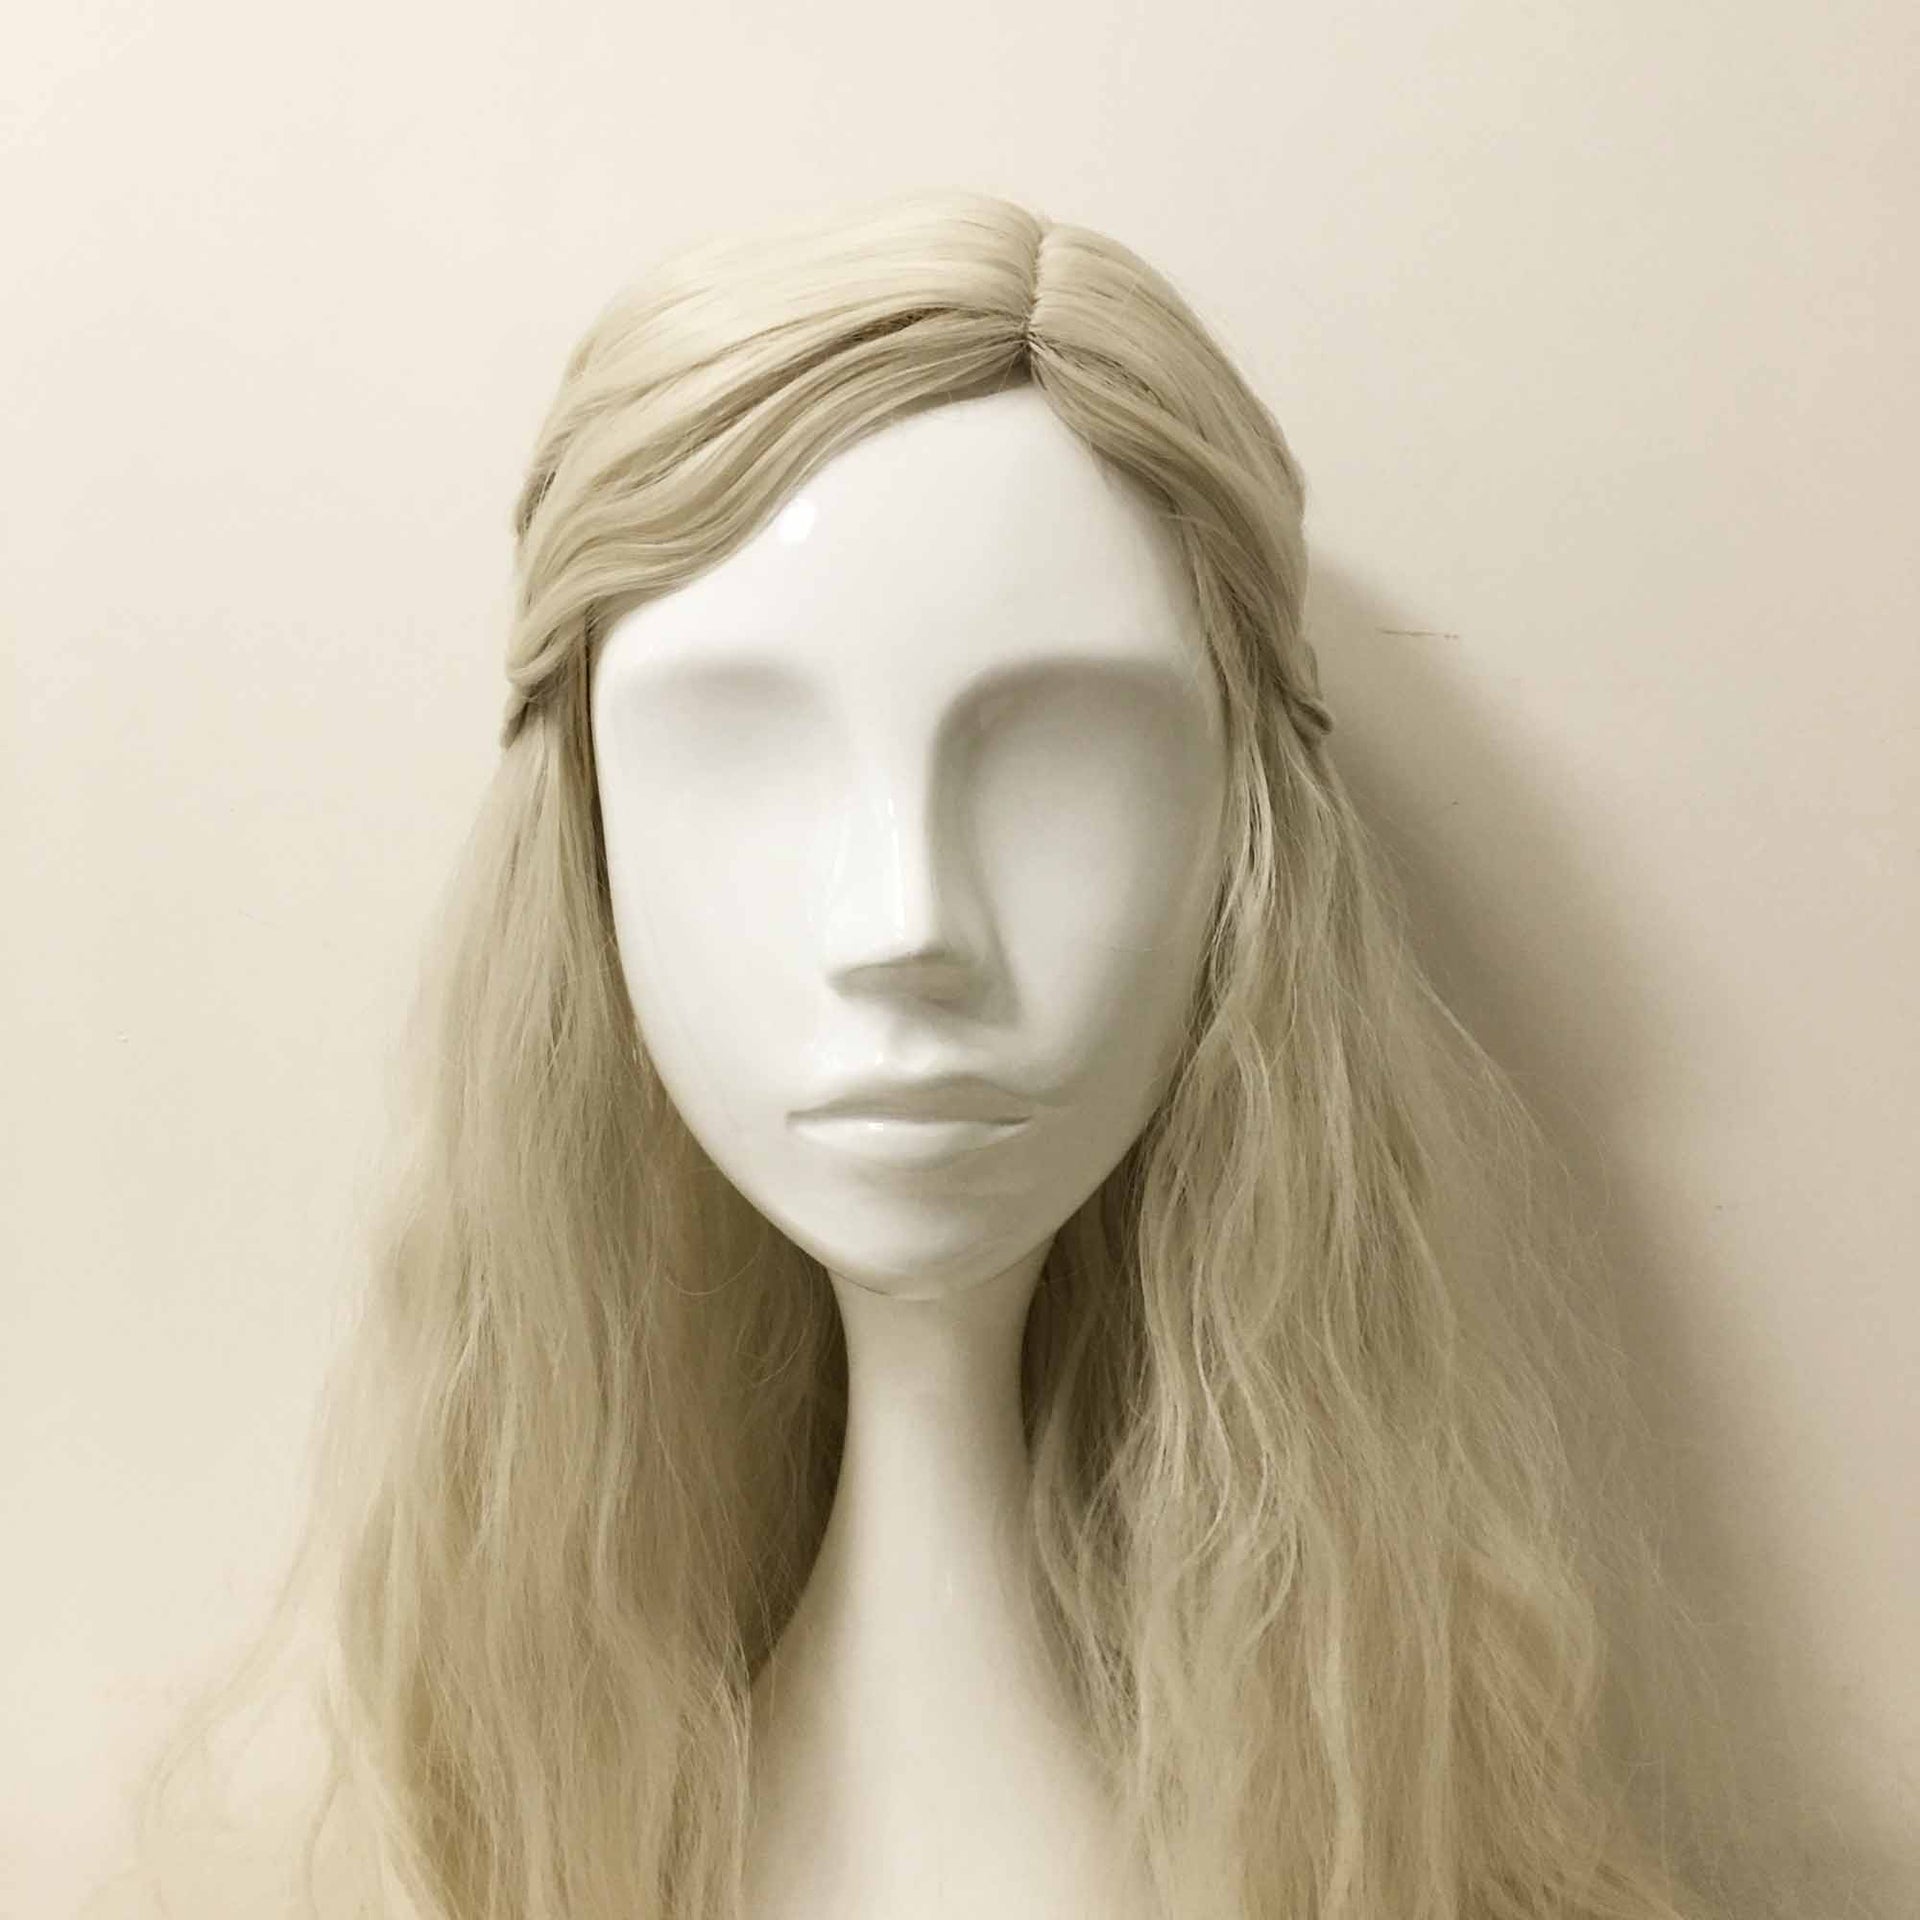 nevermindyrhead Women White Long Wavy Frizzy Princess Style Braided Side Part Cosplay Wig